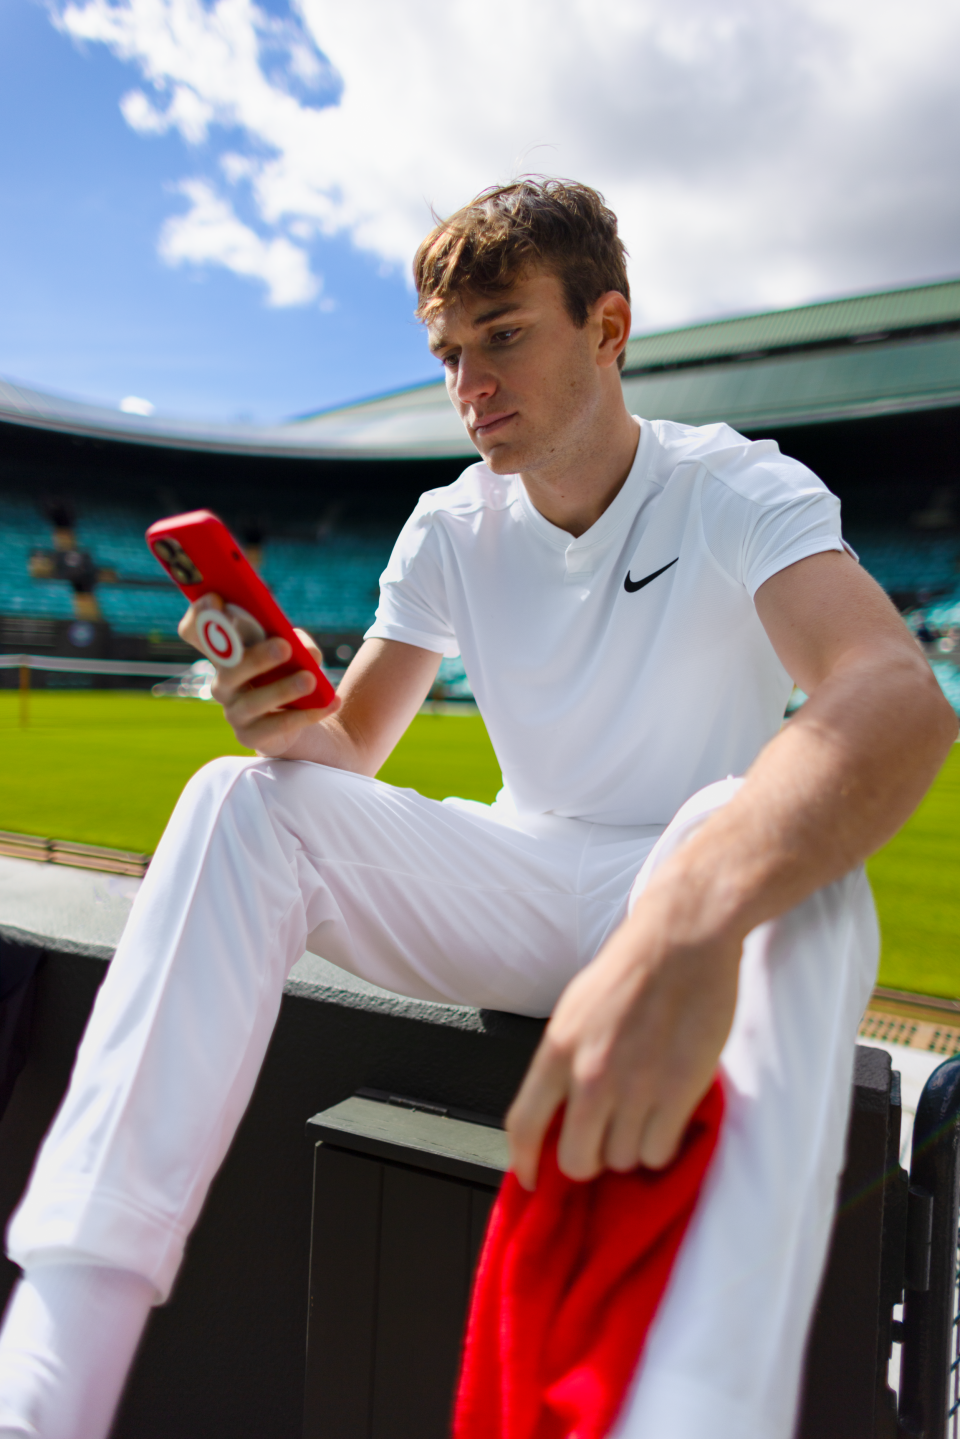 Vodafone, Official Connectivity Partner of Wimbledon, is working with Jack Draper to inspire the next generation of tennis players through Play Your Way To Wimbledon